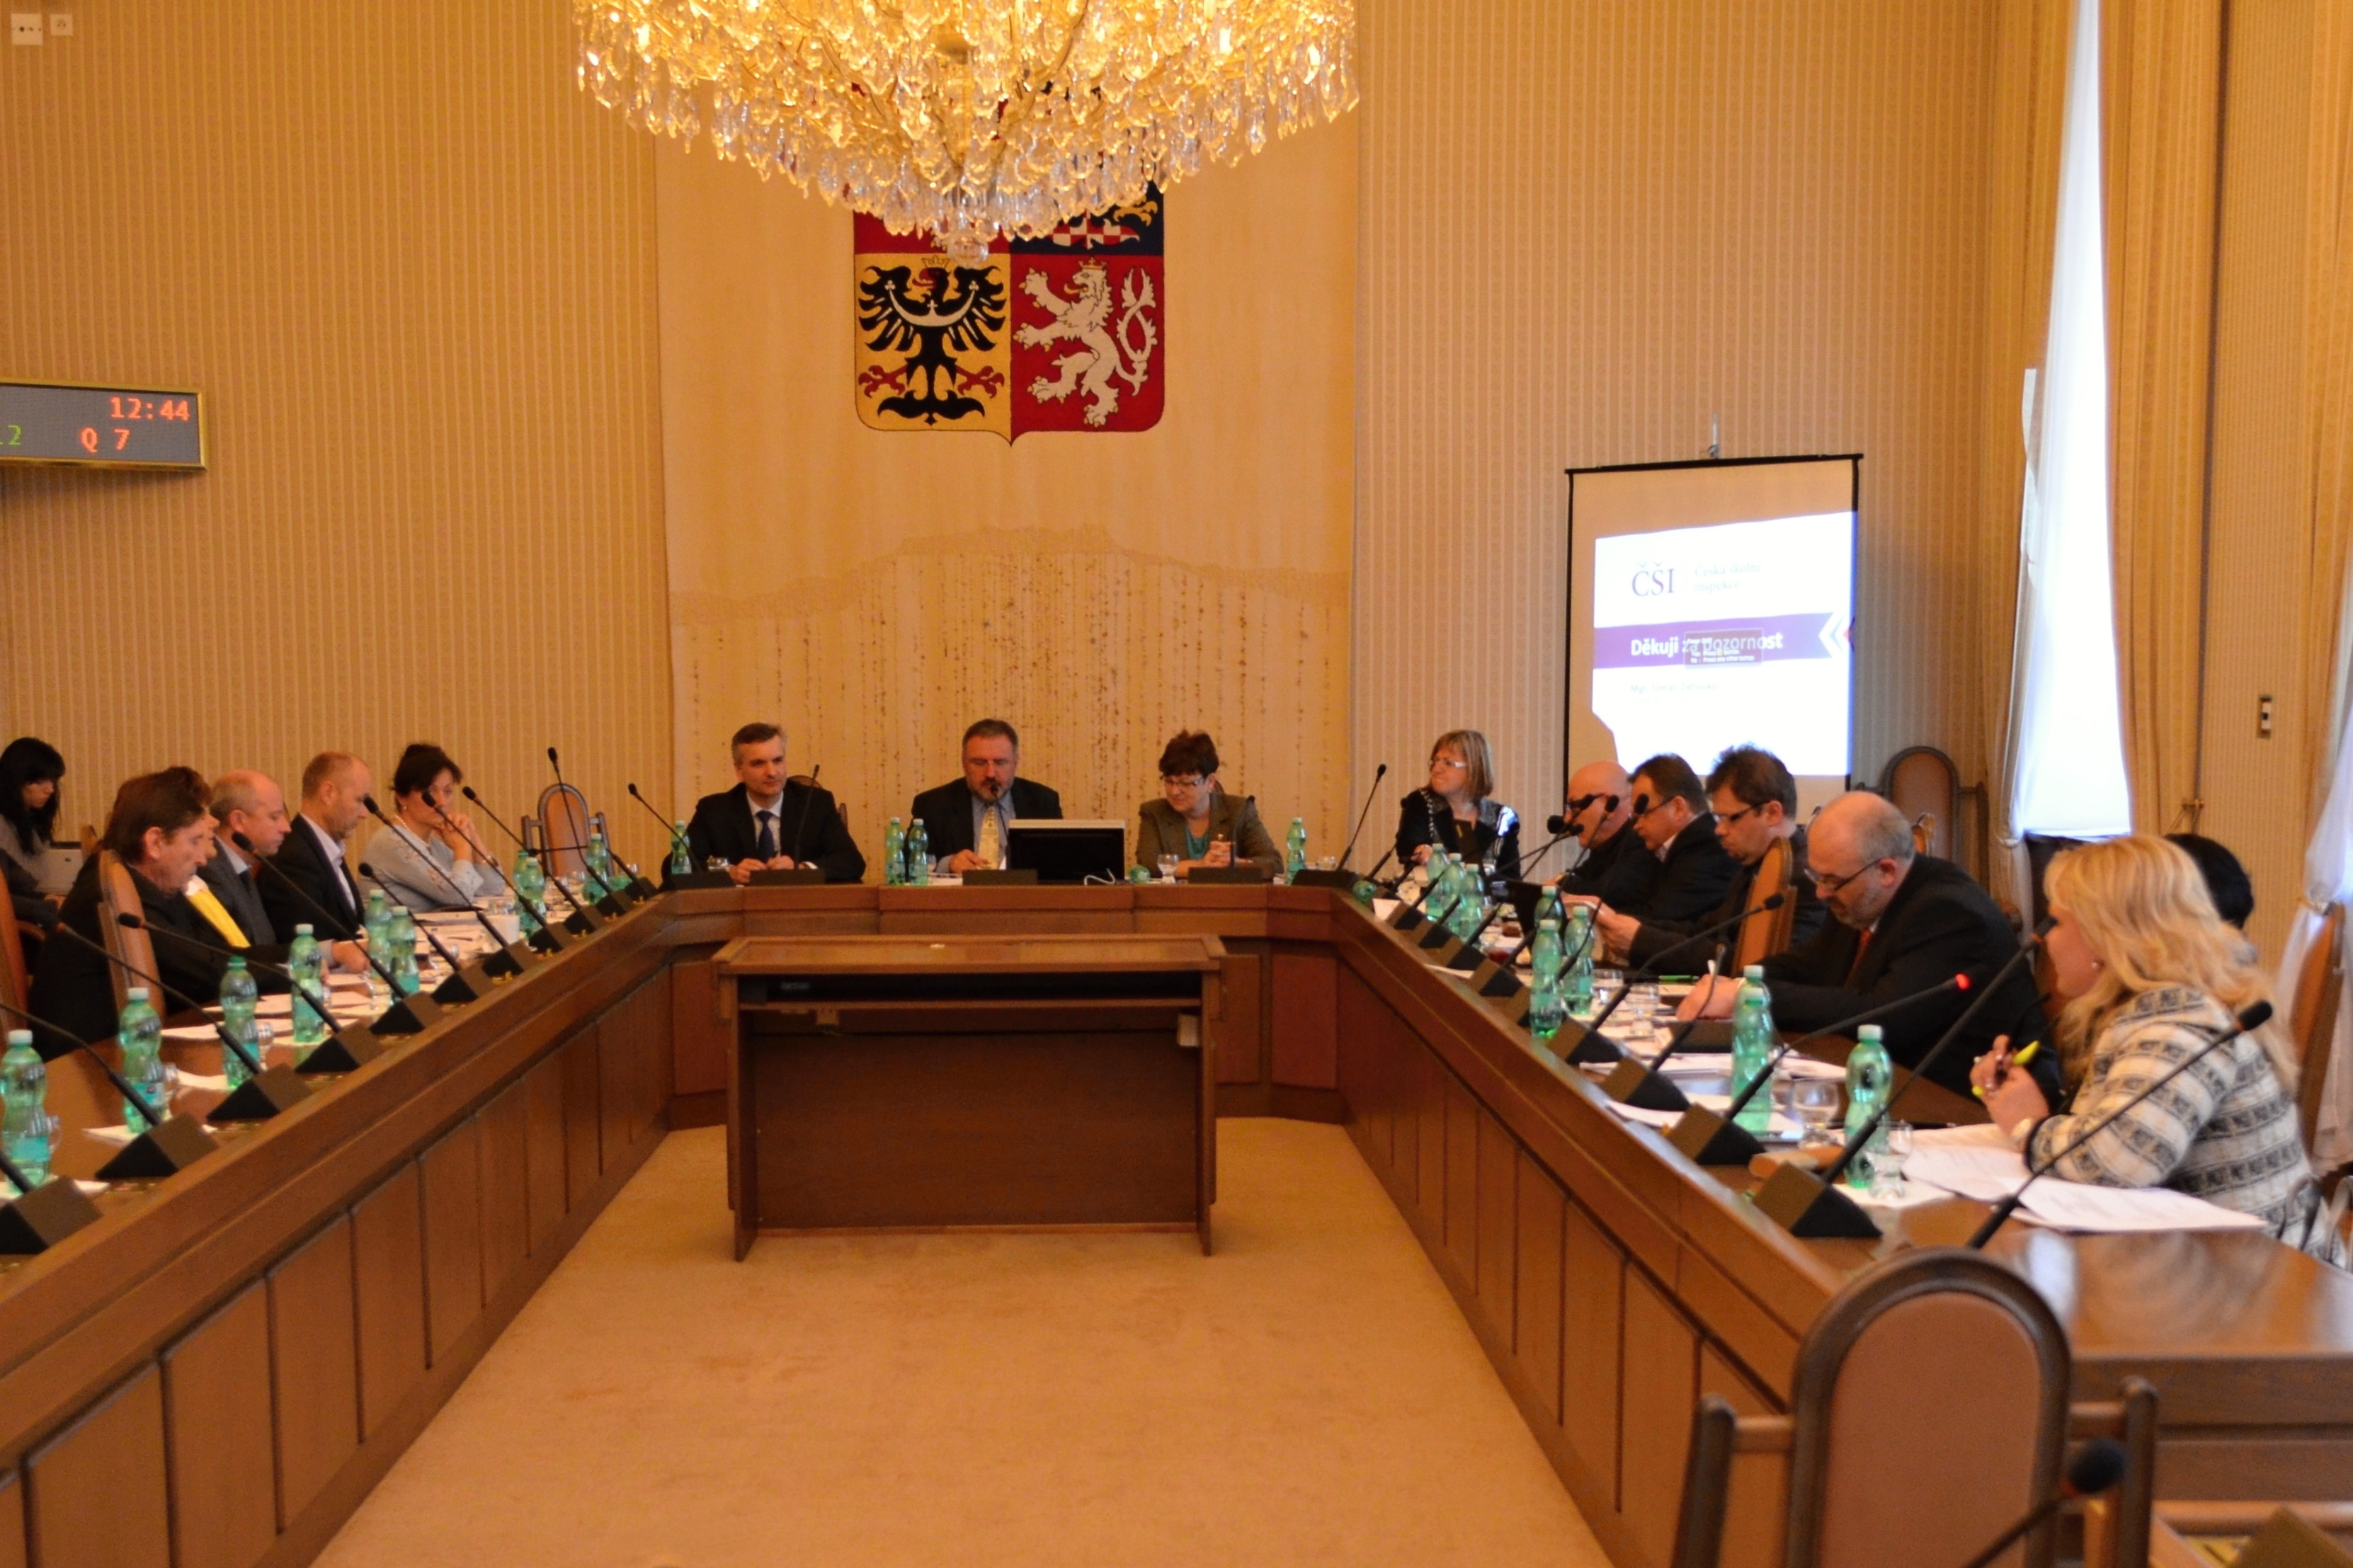 The Parliament of the Czech Republic discussed the Annual Report of the CSI 